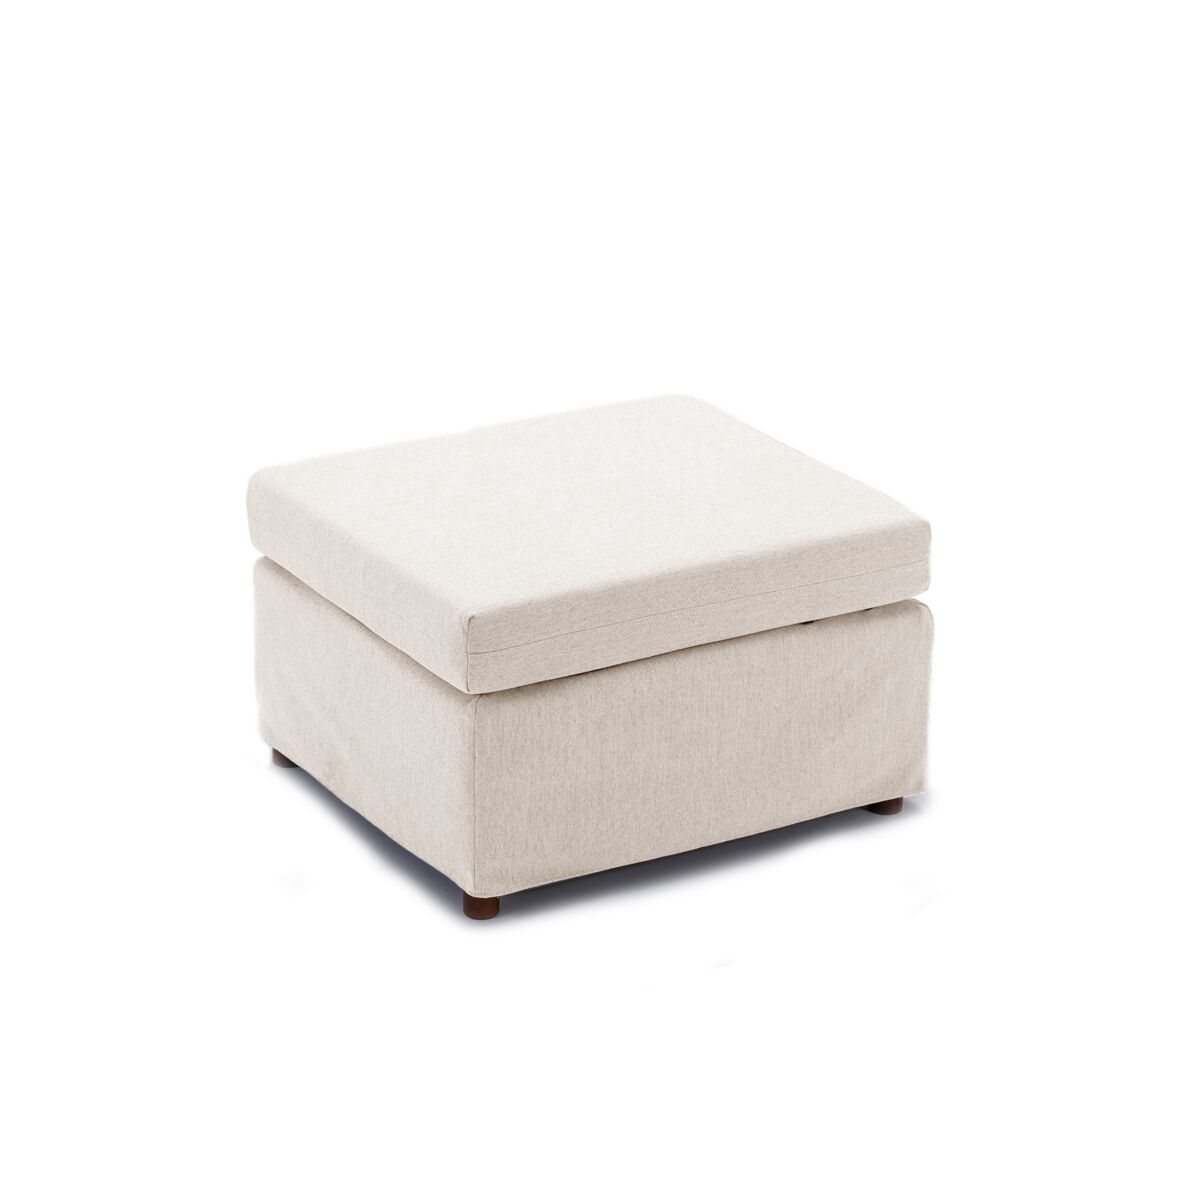 Simplie Fun Single Movable ottoman for Modular Sectional Sofa Couch Without Storage Function, Cushion Covers Removable and Washable, Cream - Open Beige